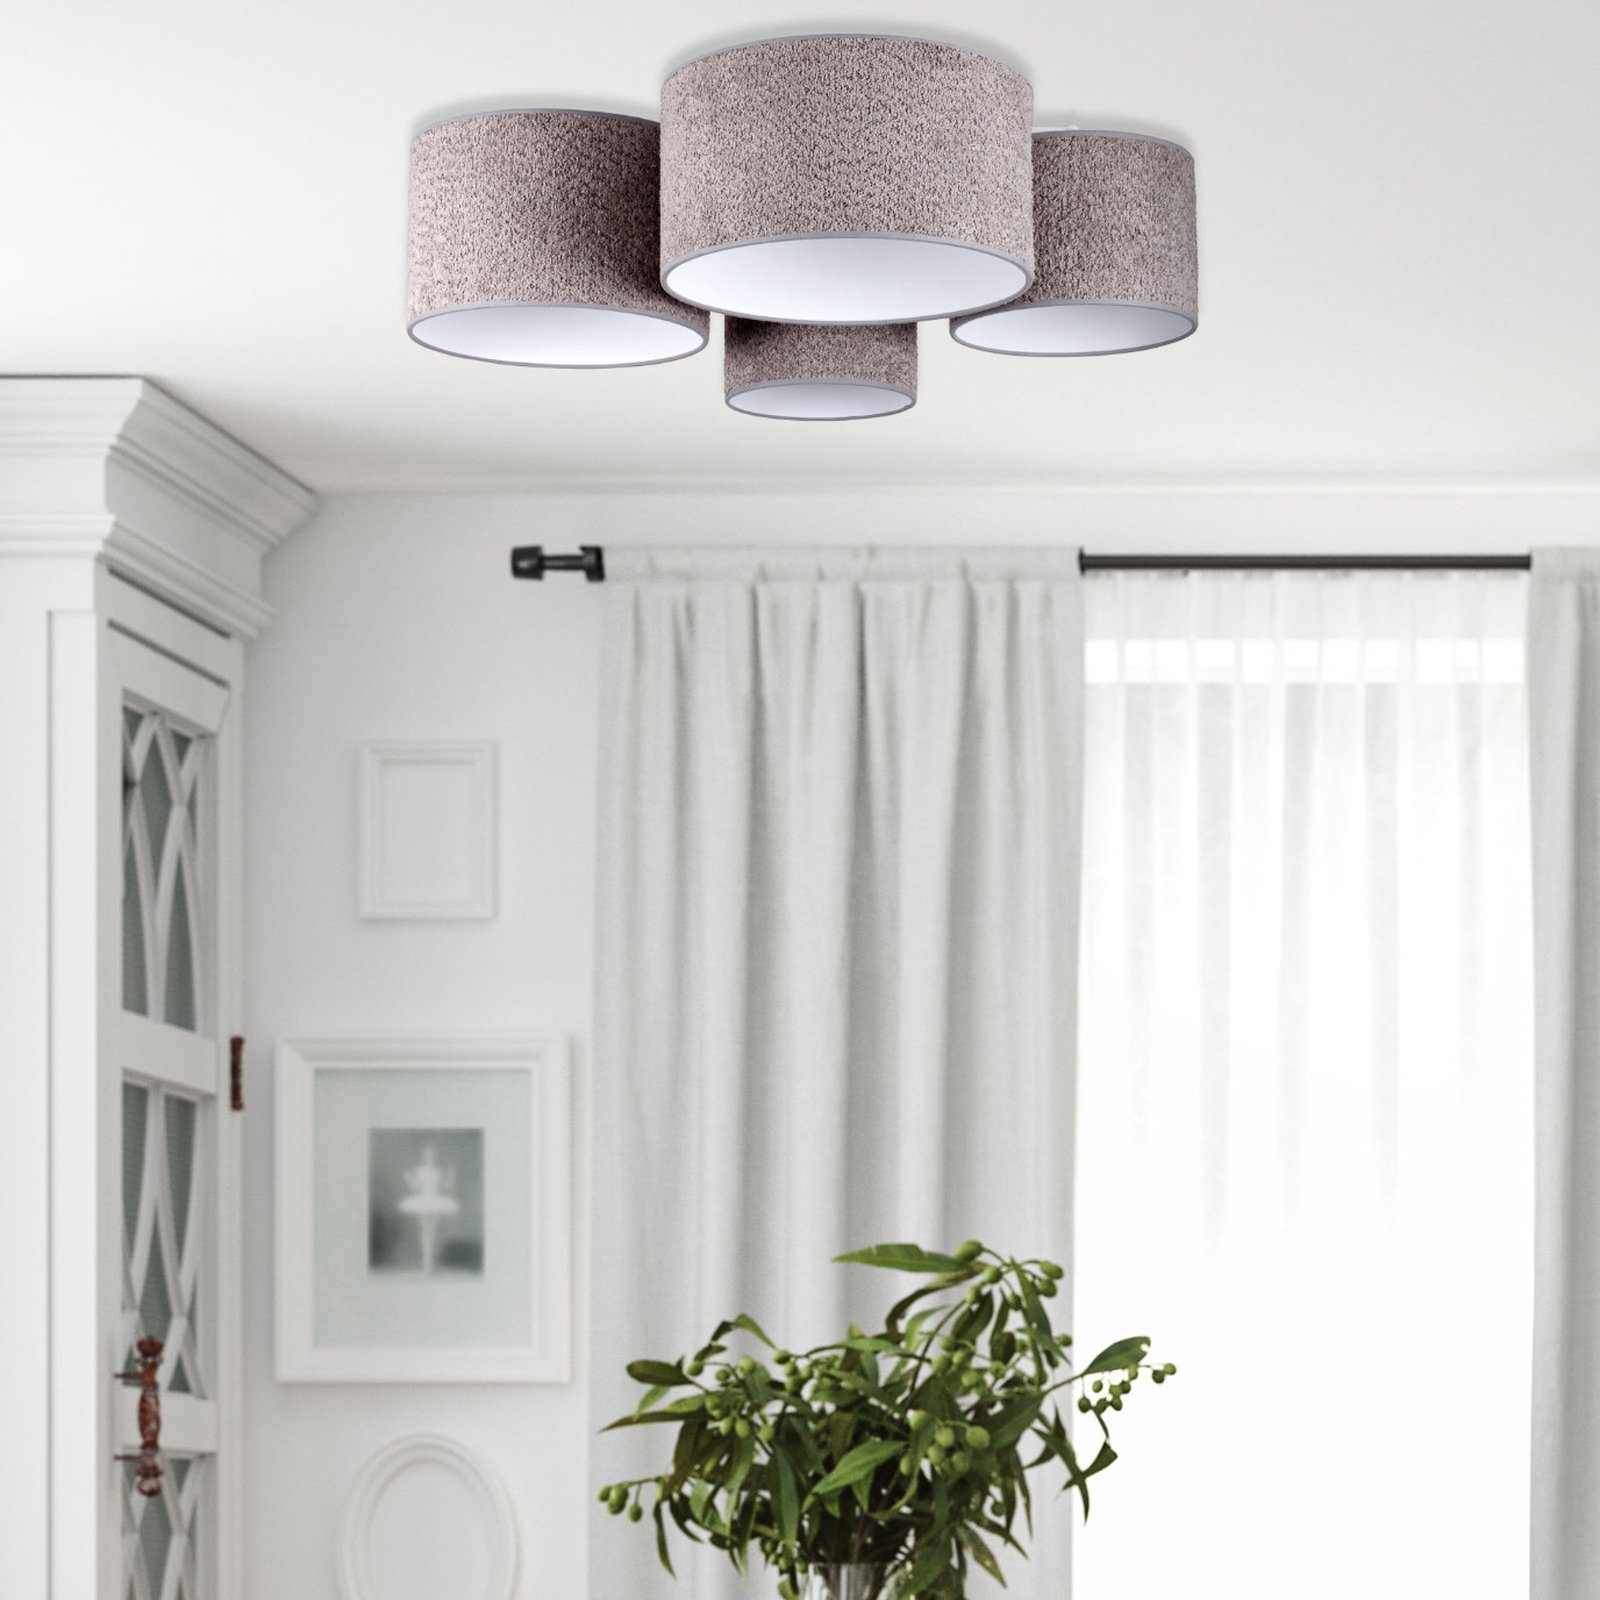 Bouclé ceiling light with 4 lampshades, grey